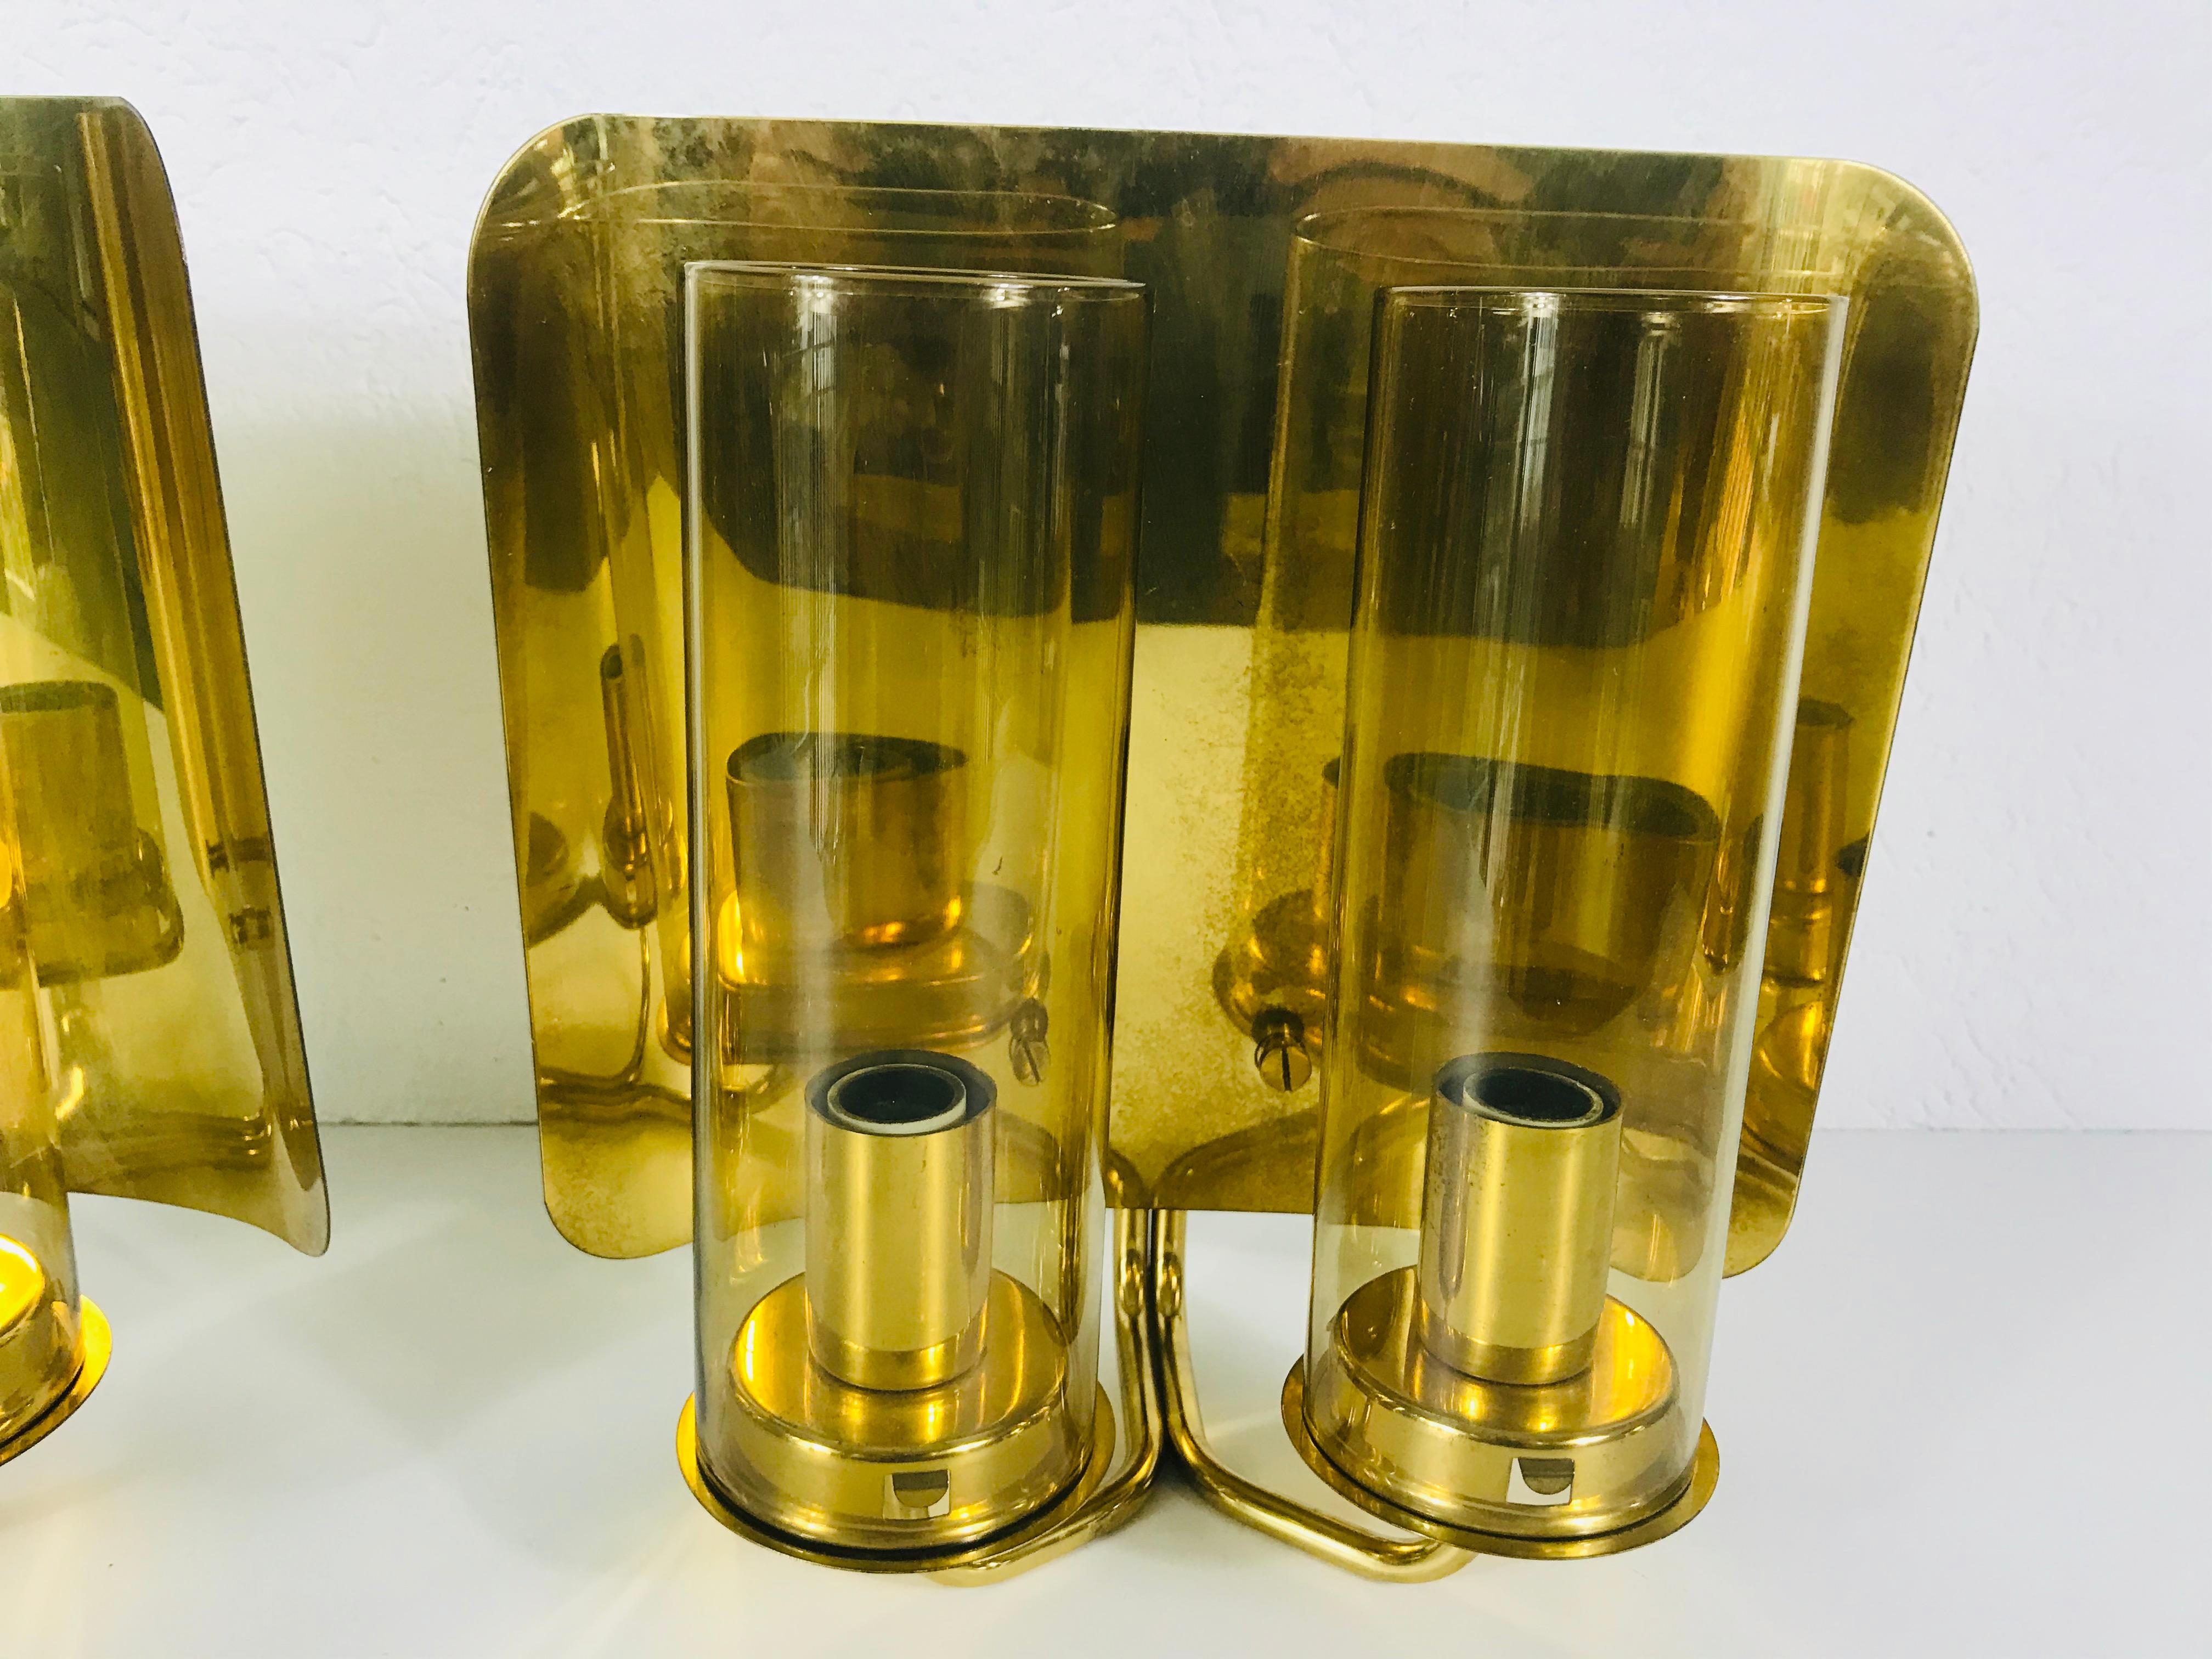 Pair of Mid-Century Modern Brass Sconces by Hans-Agne Jakobsson, Sweden, 1960s For Sale 3